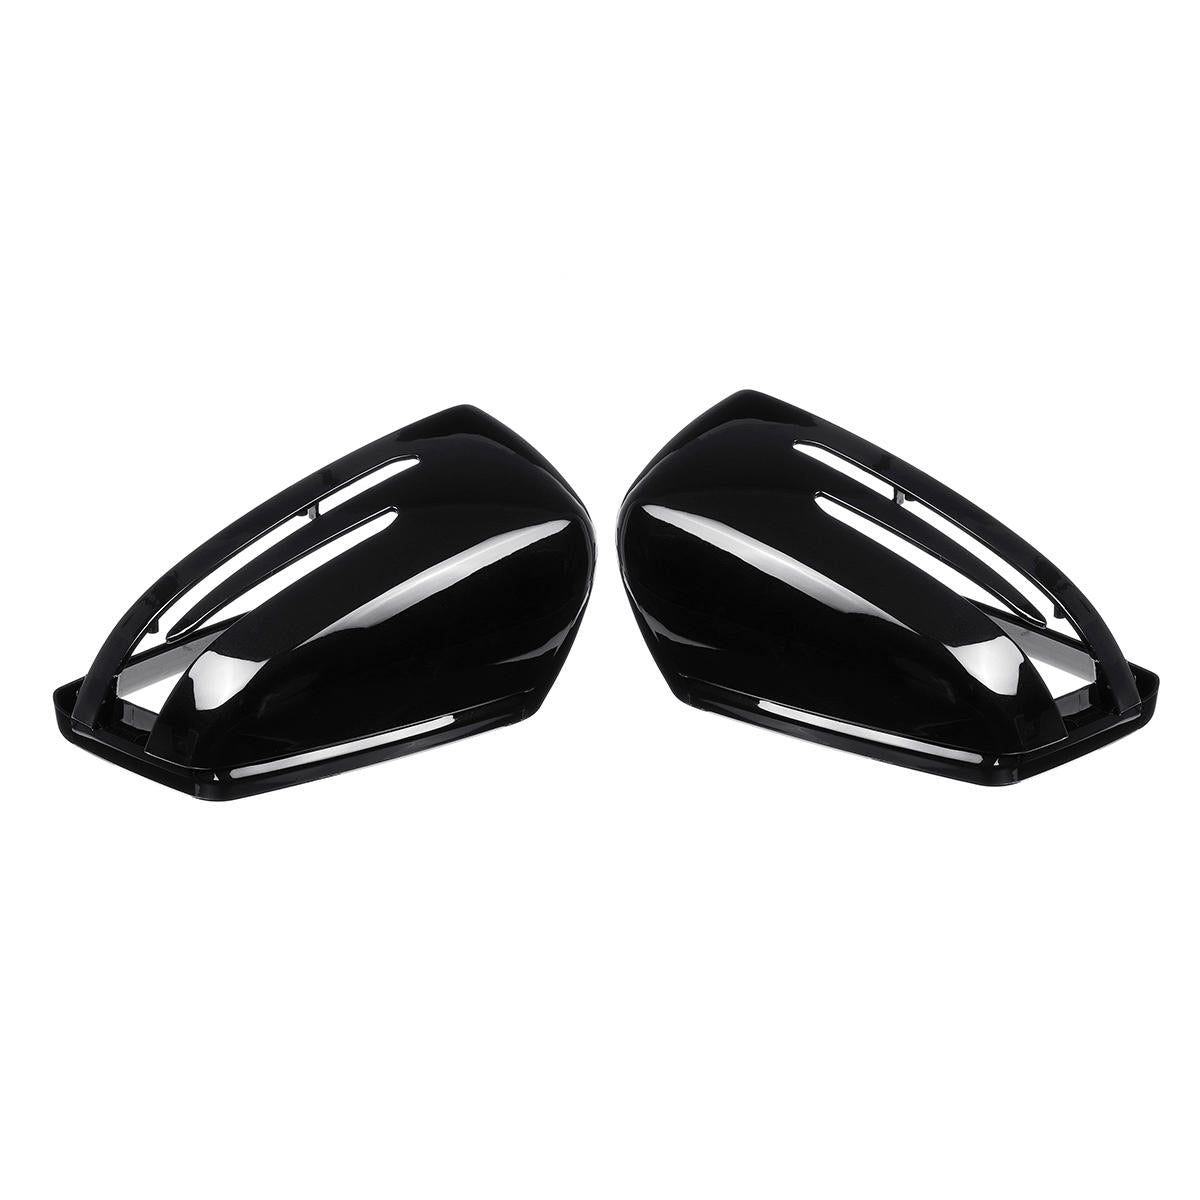 MERCEDES W204 MIRROR COVERS